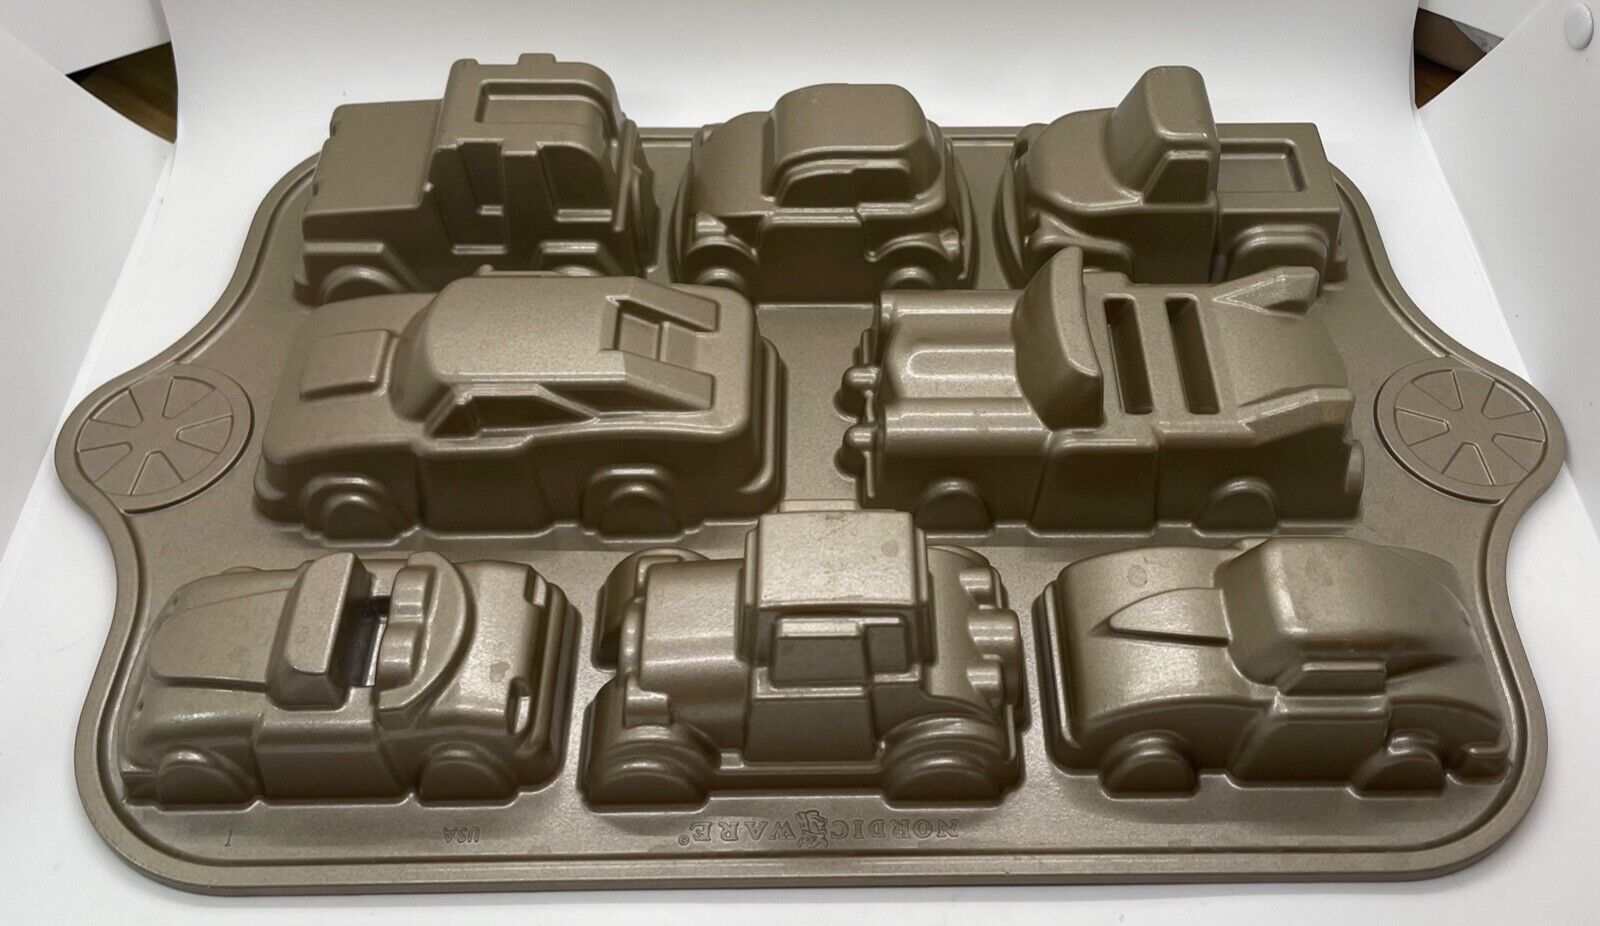 Nordic Ware Sweet Rides Classic Car Cupcake Pan Mold - Holds 5 Cups Made in USA